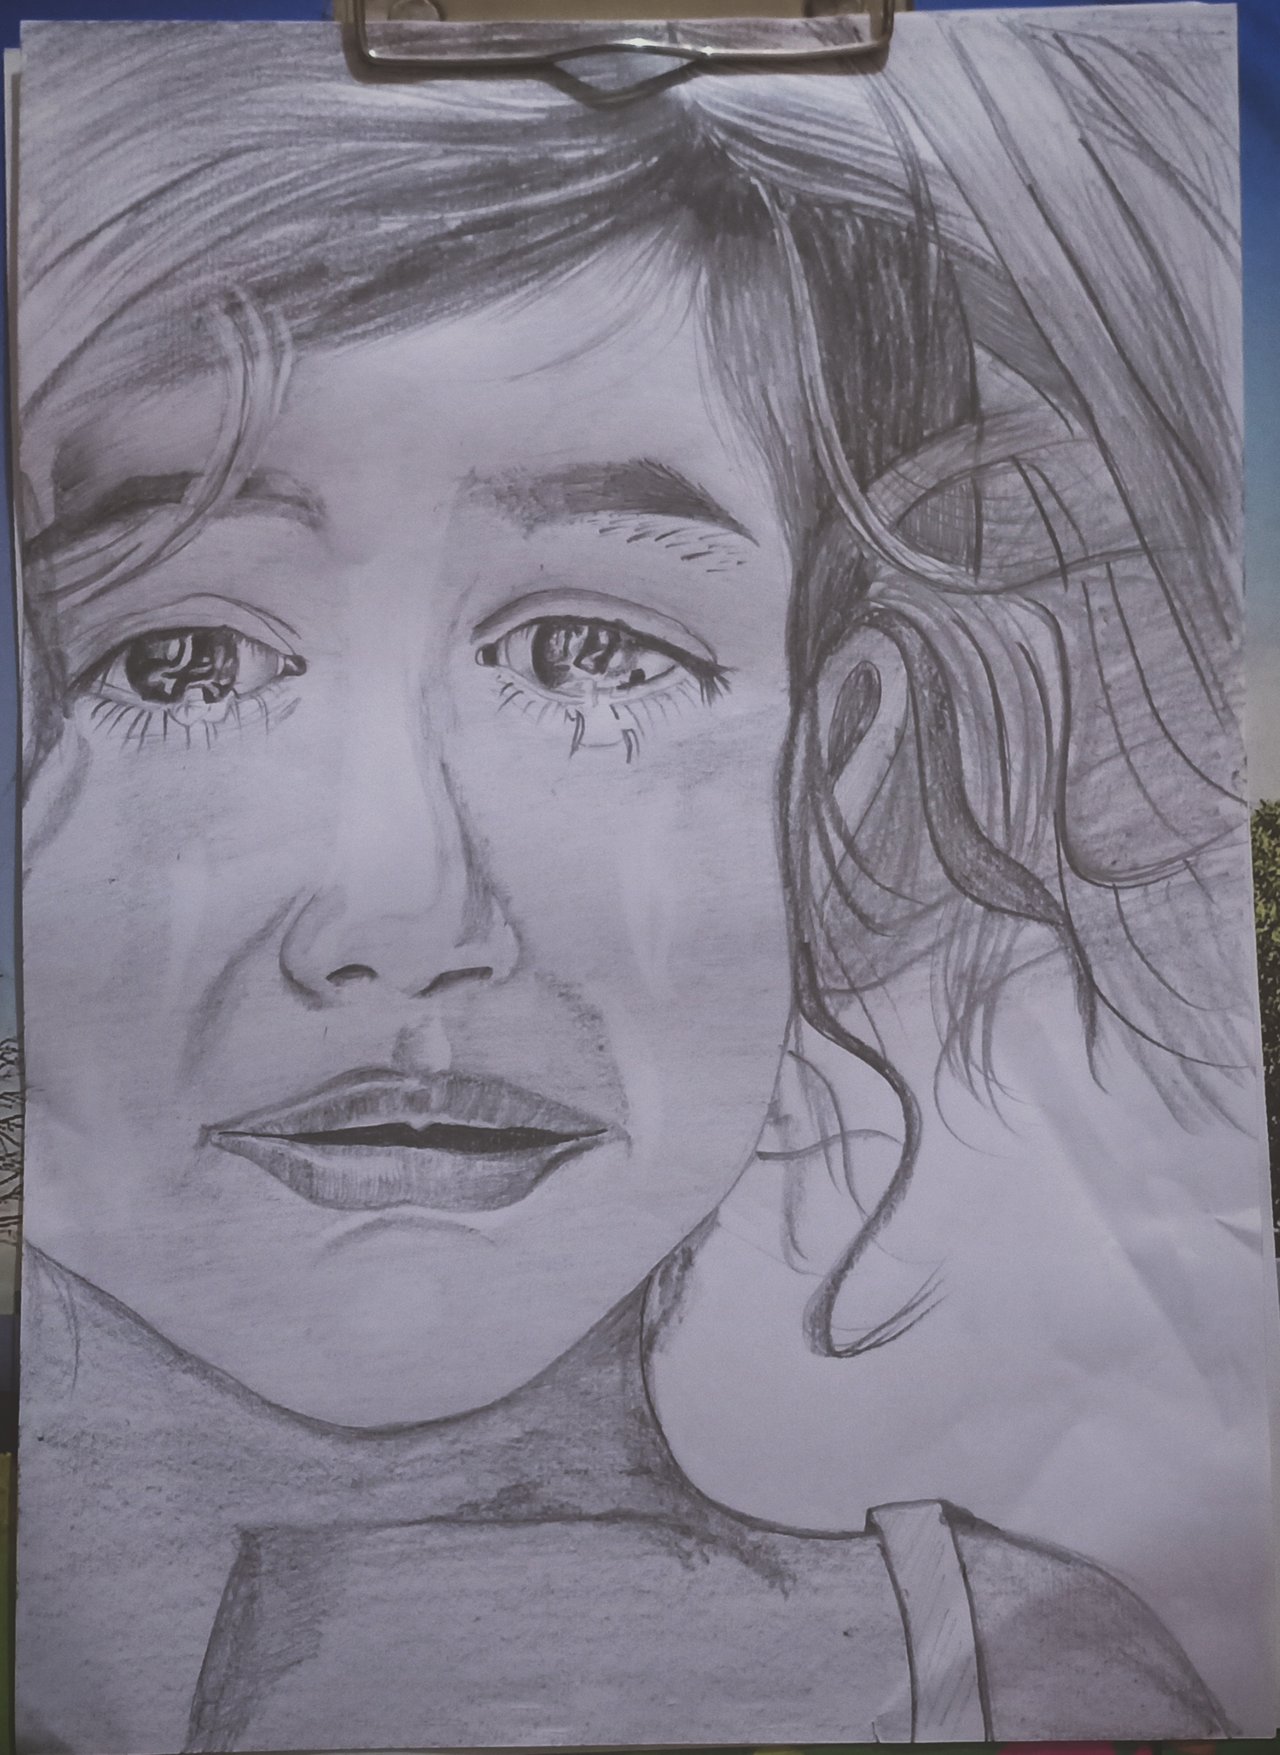 drawing of a girl crying